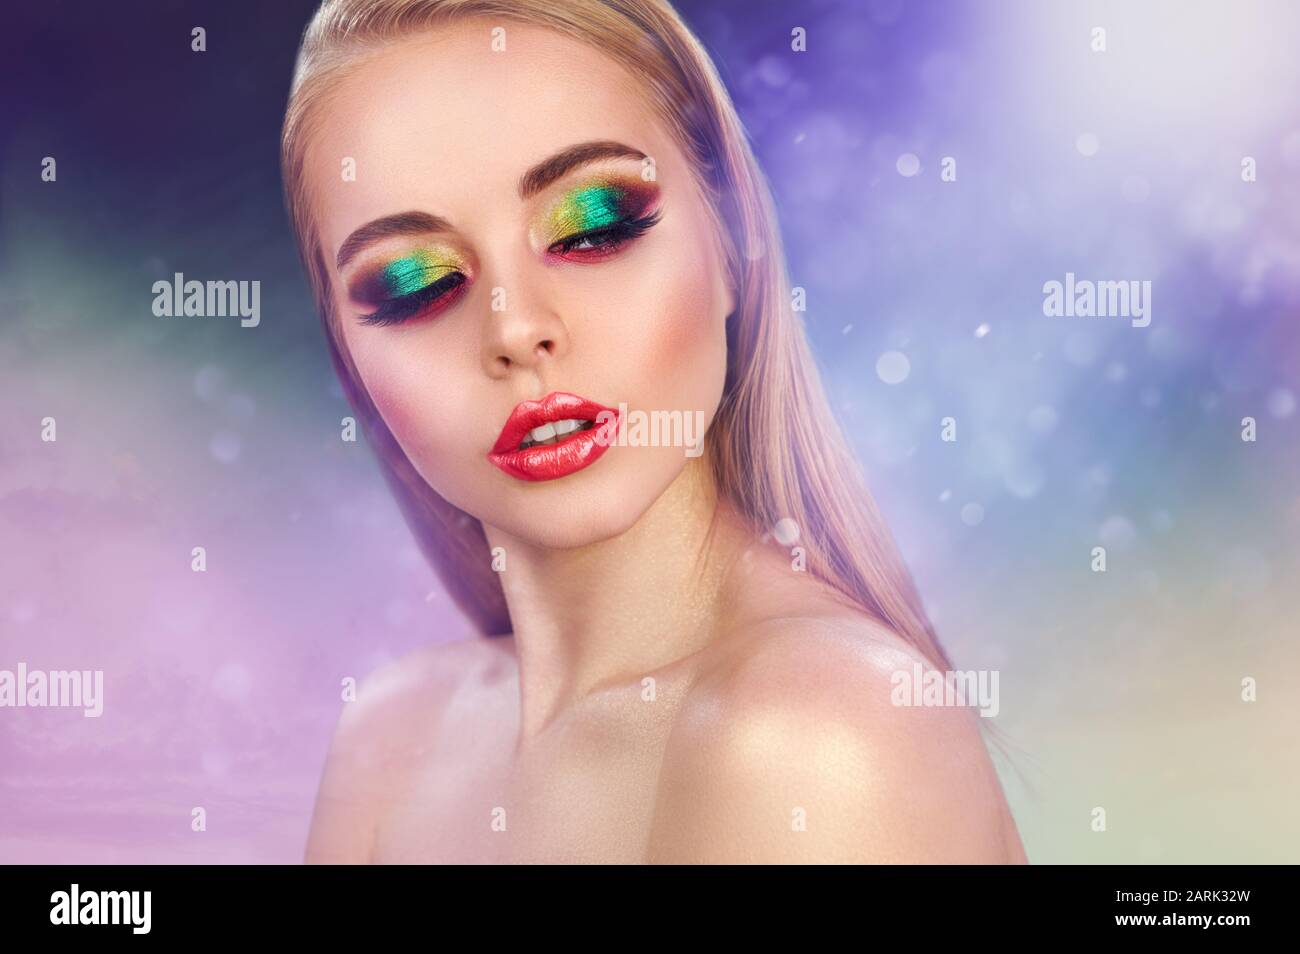 Cute blonde fashion model girl in trendy make-up. Eye models with colorful glitter on the eyelids Stock Photo